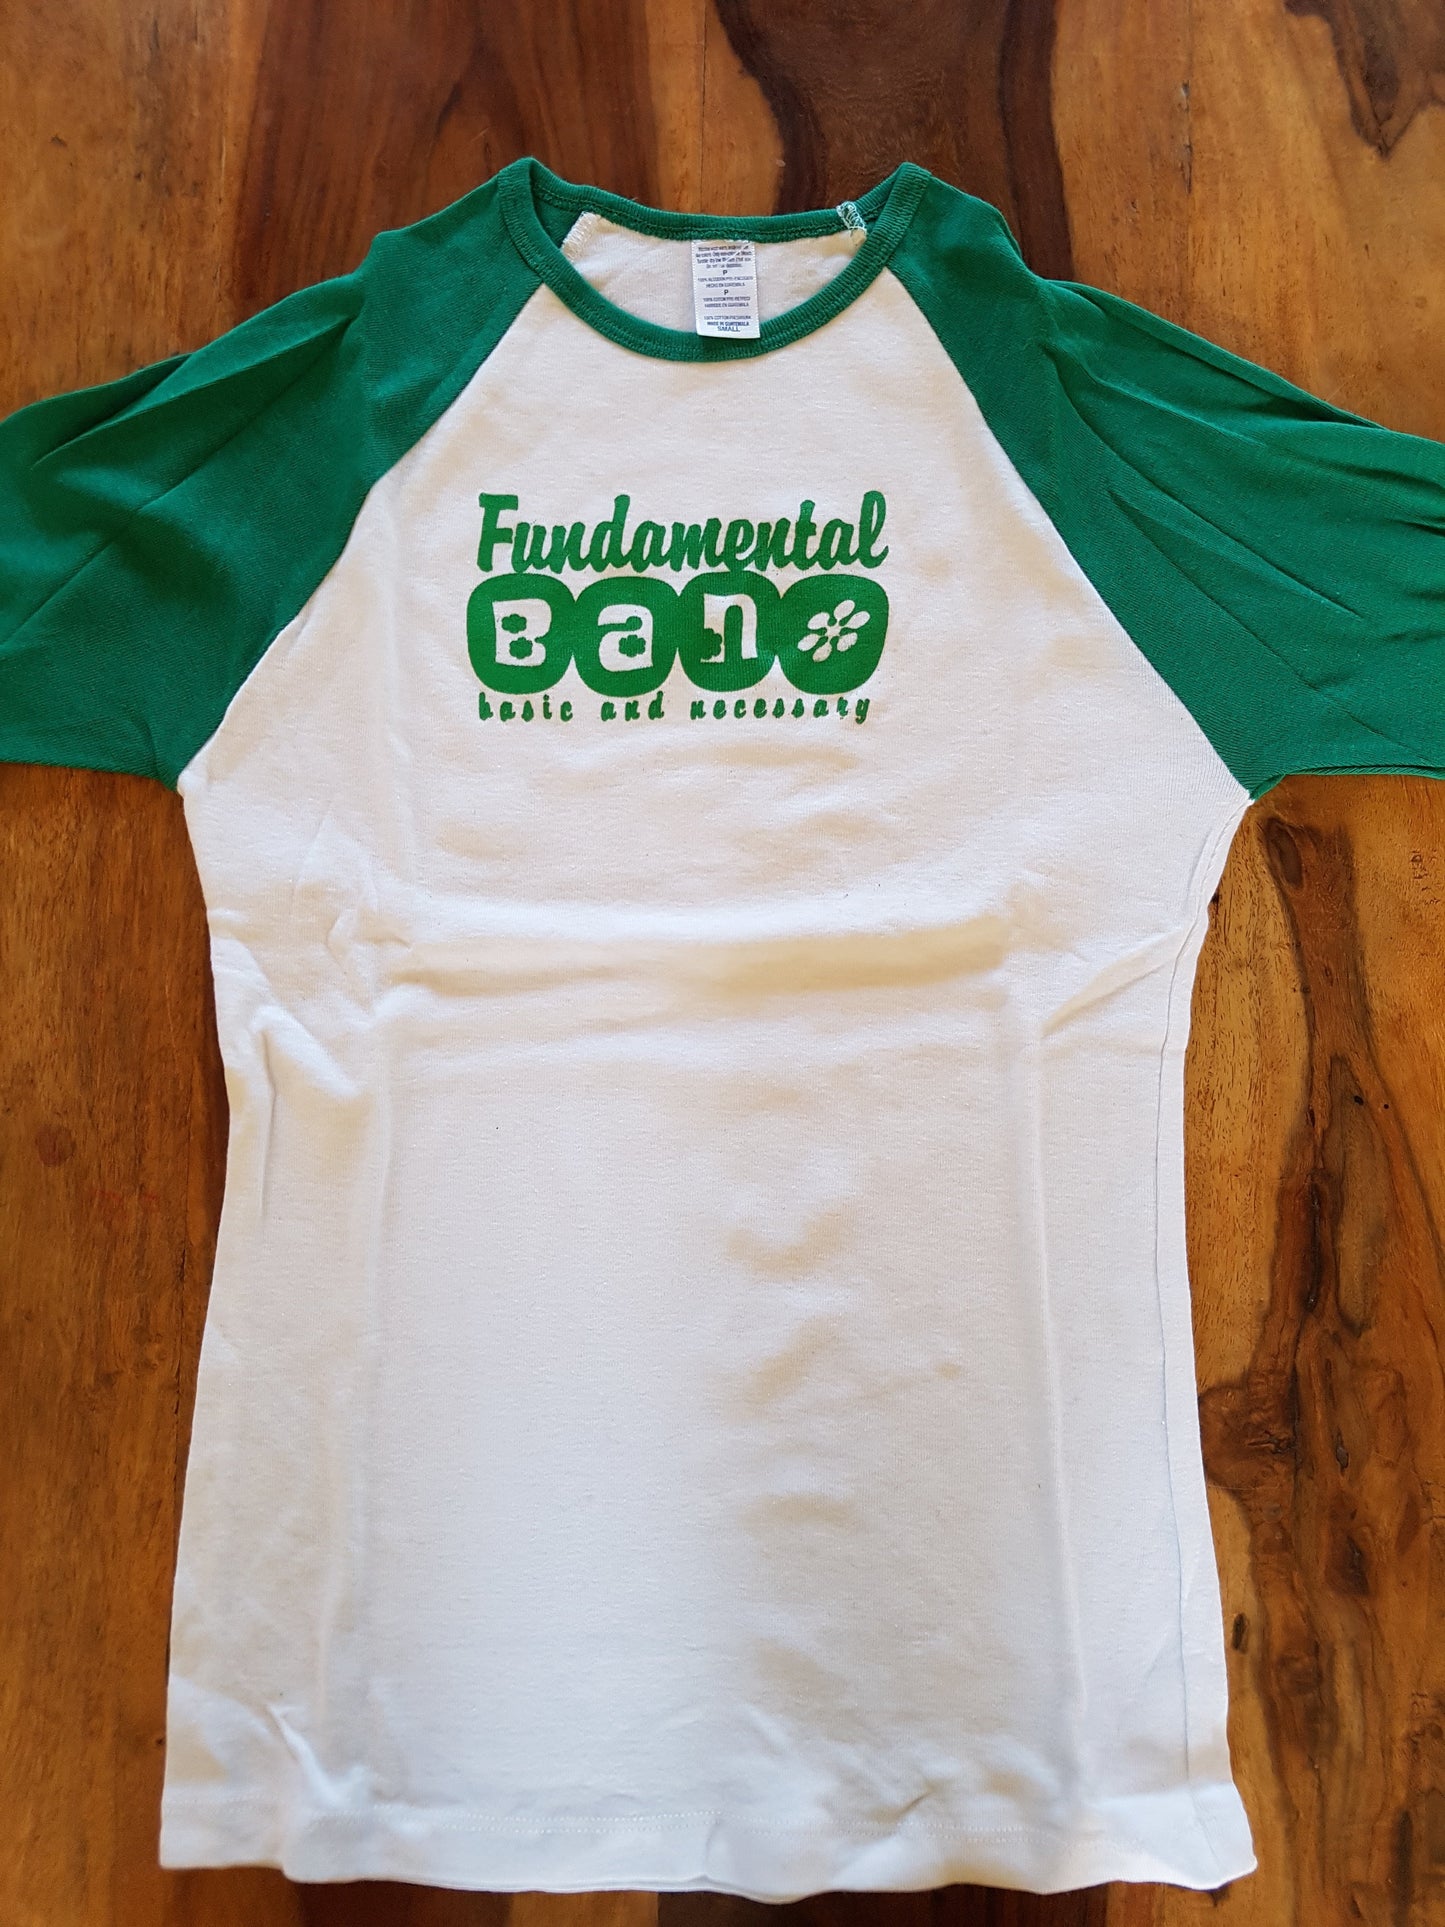 Fundamental B.A.N. Limited Edition Girl's Small T Shirt Green and White